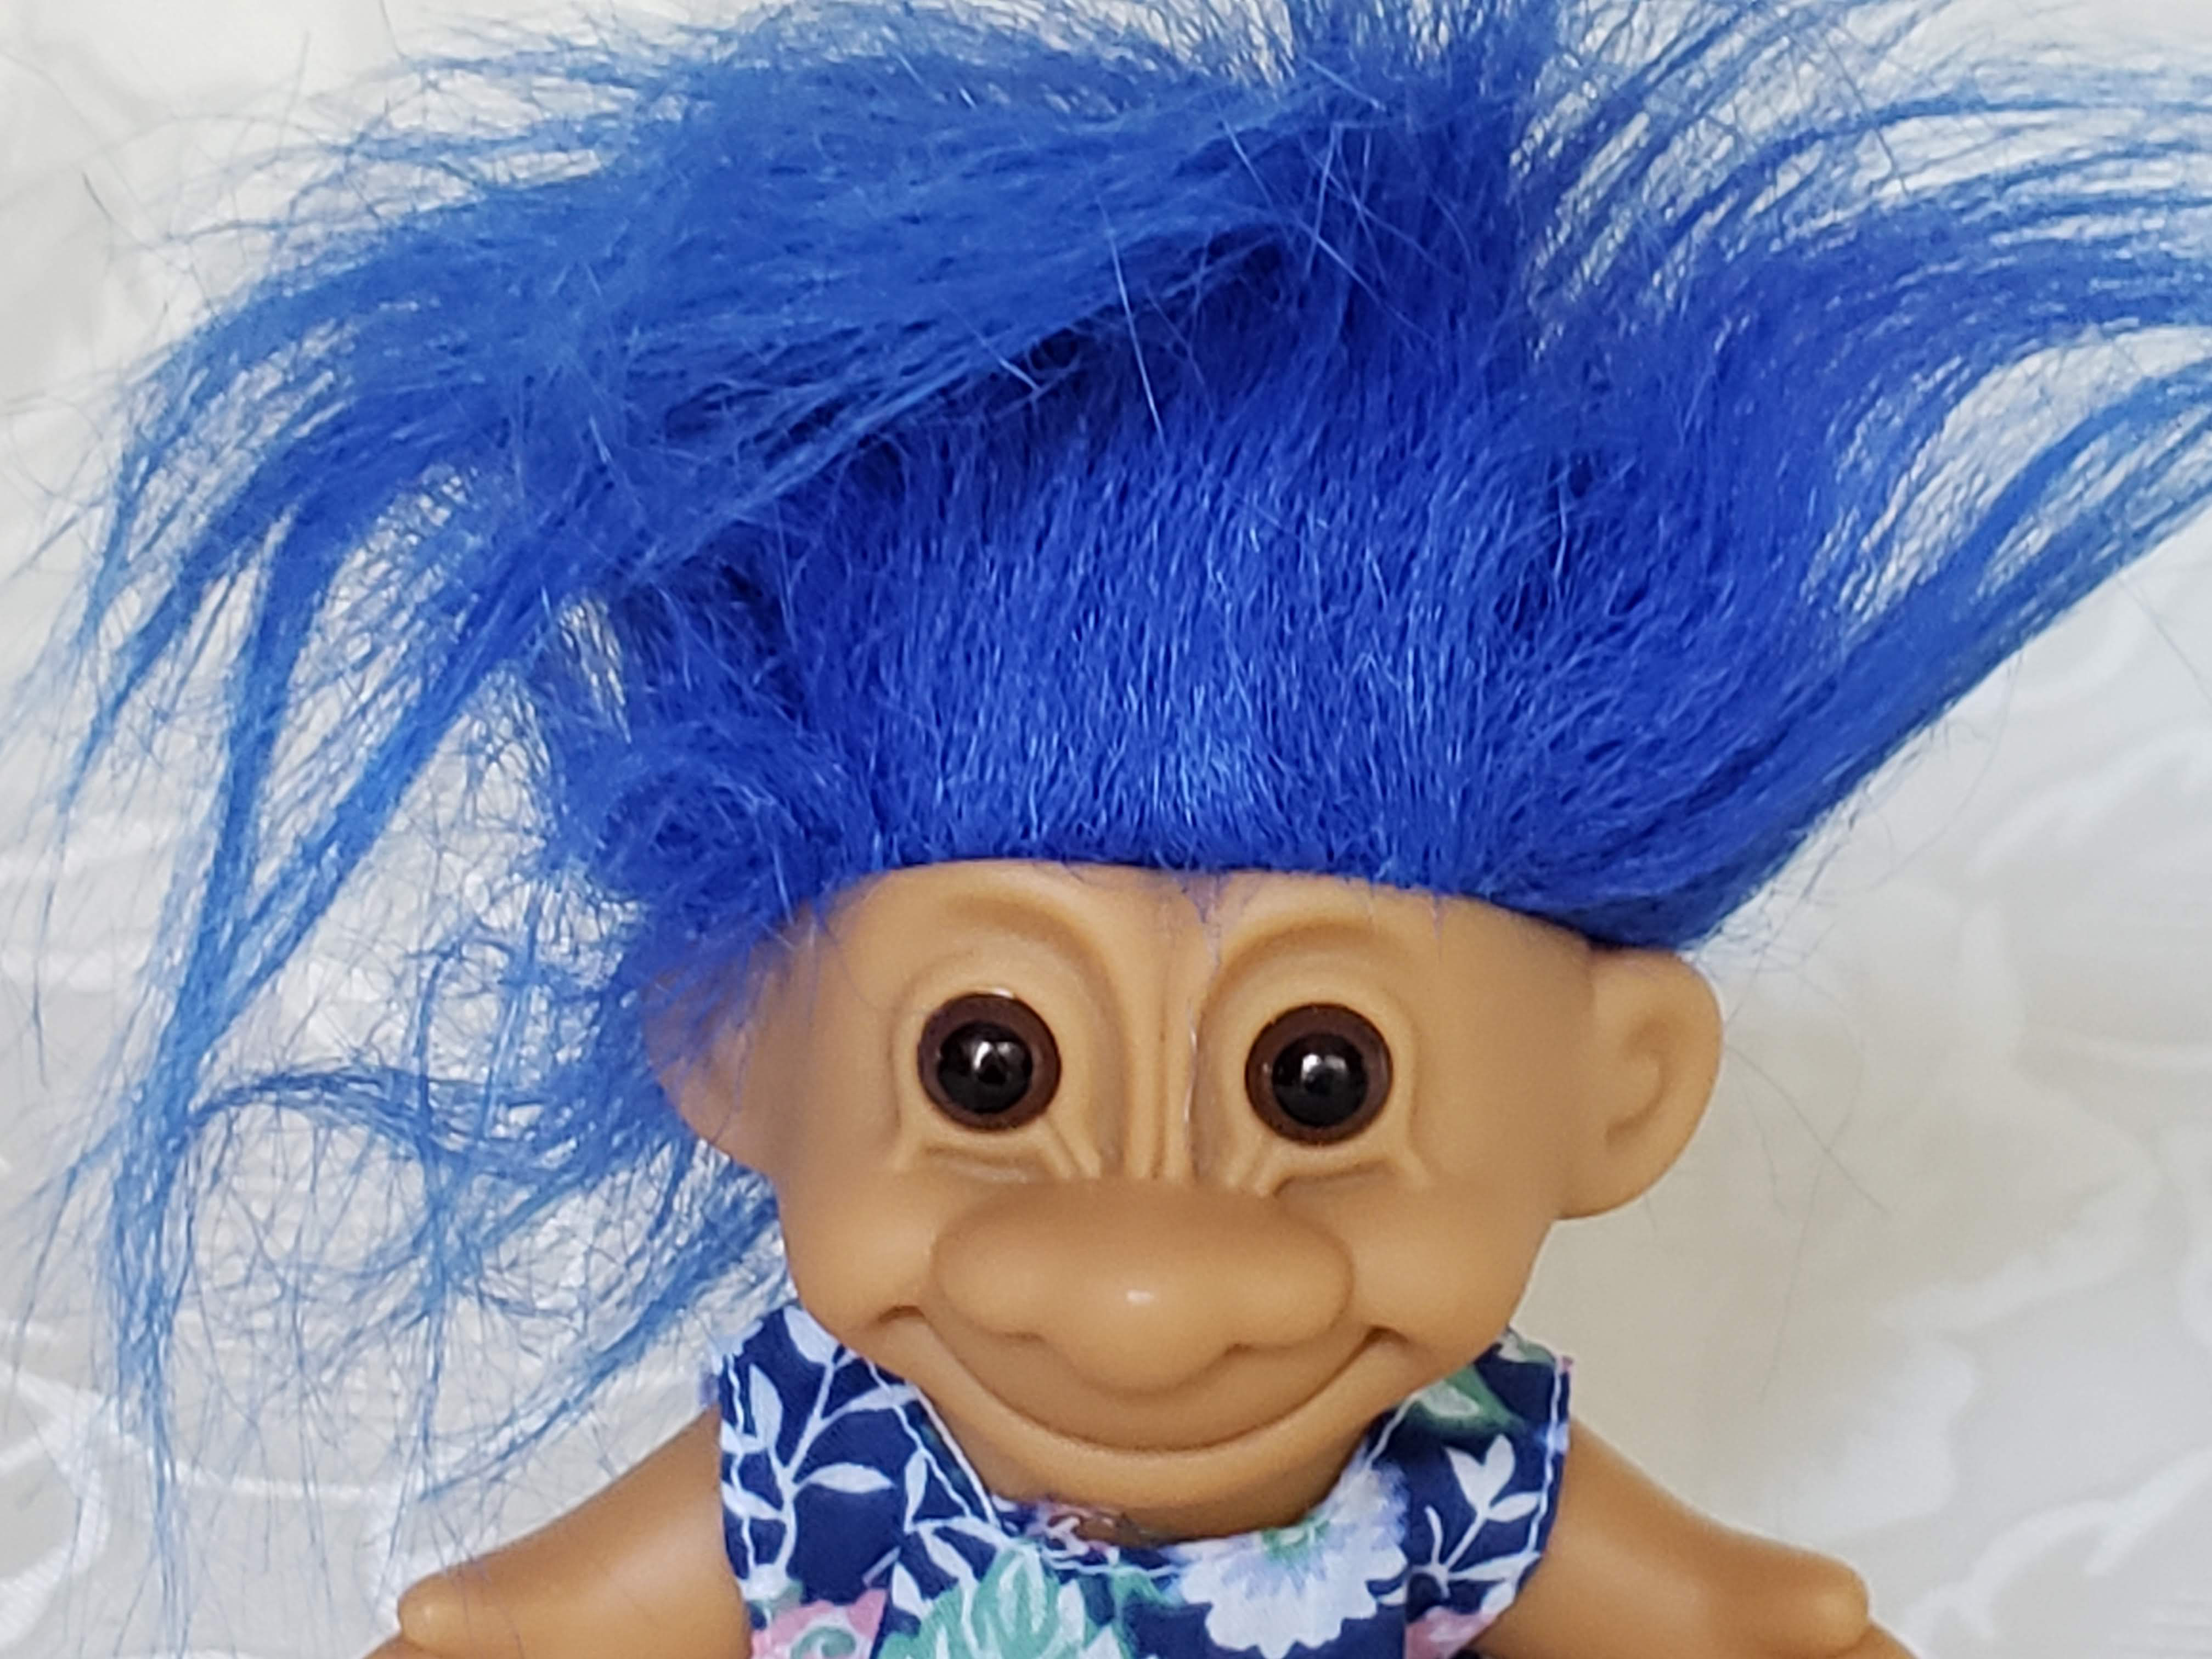 18 inch doll with blue hair